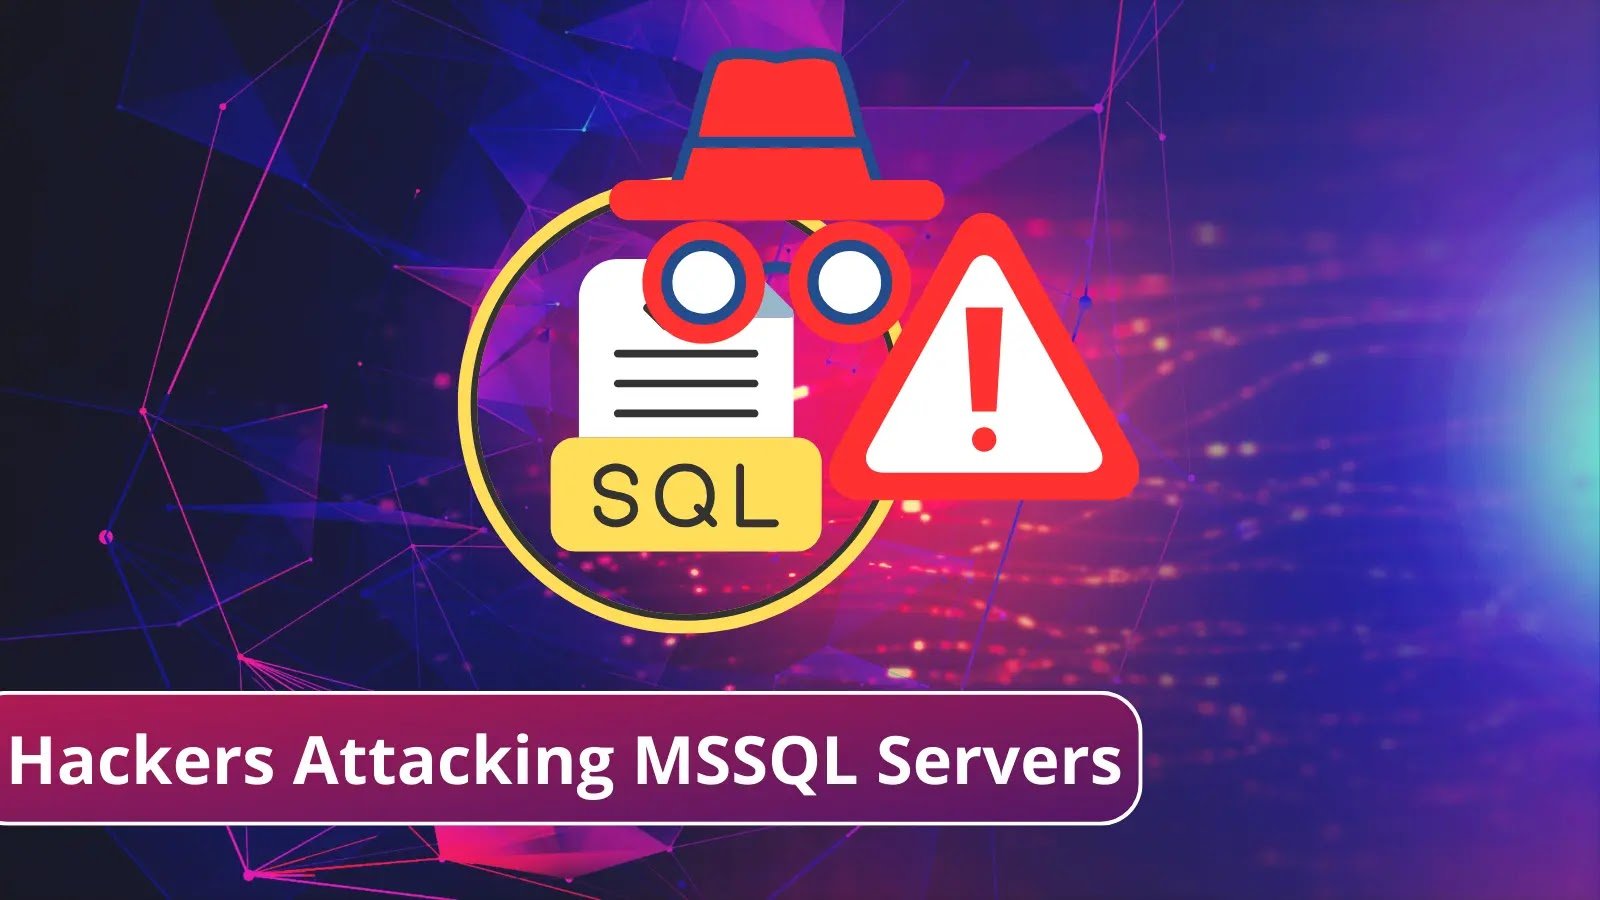 Hackers Attacking MSSQL Servers